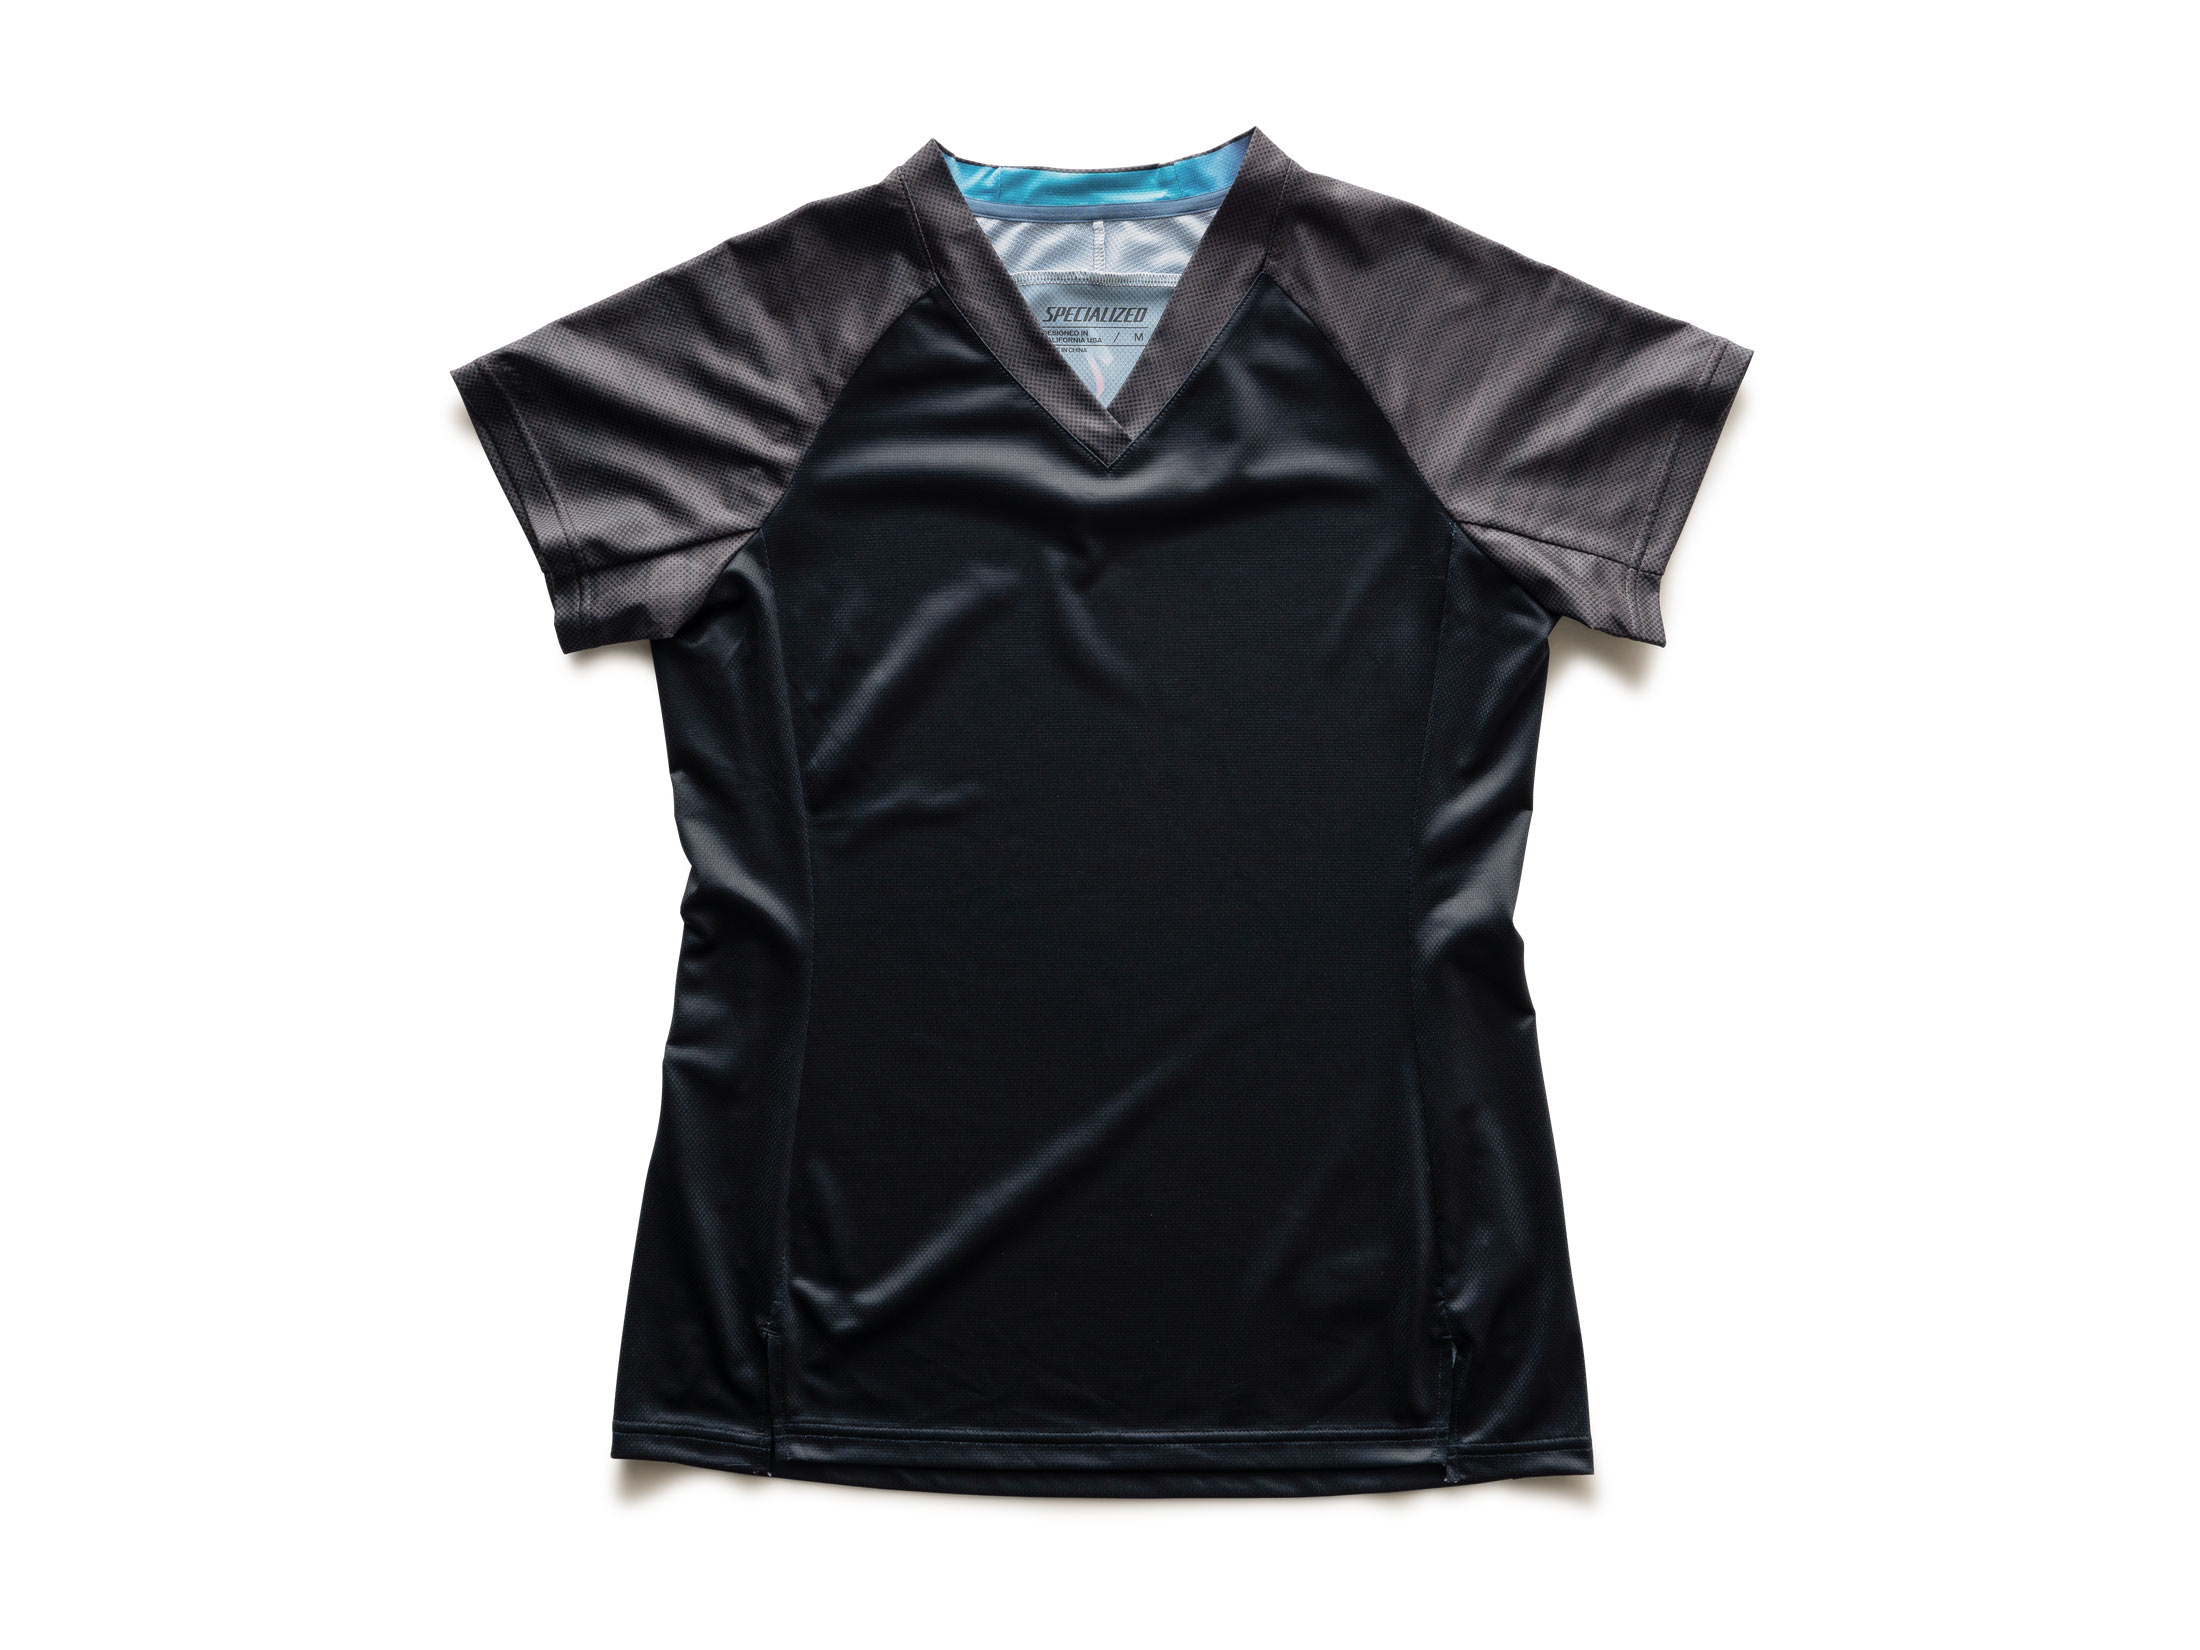 Specialized Andorra Jersey - Black / Charcoal Lightspeed